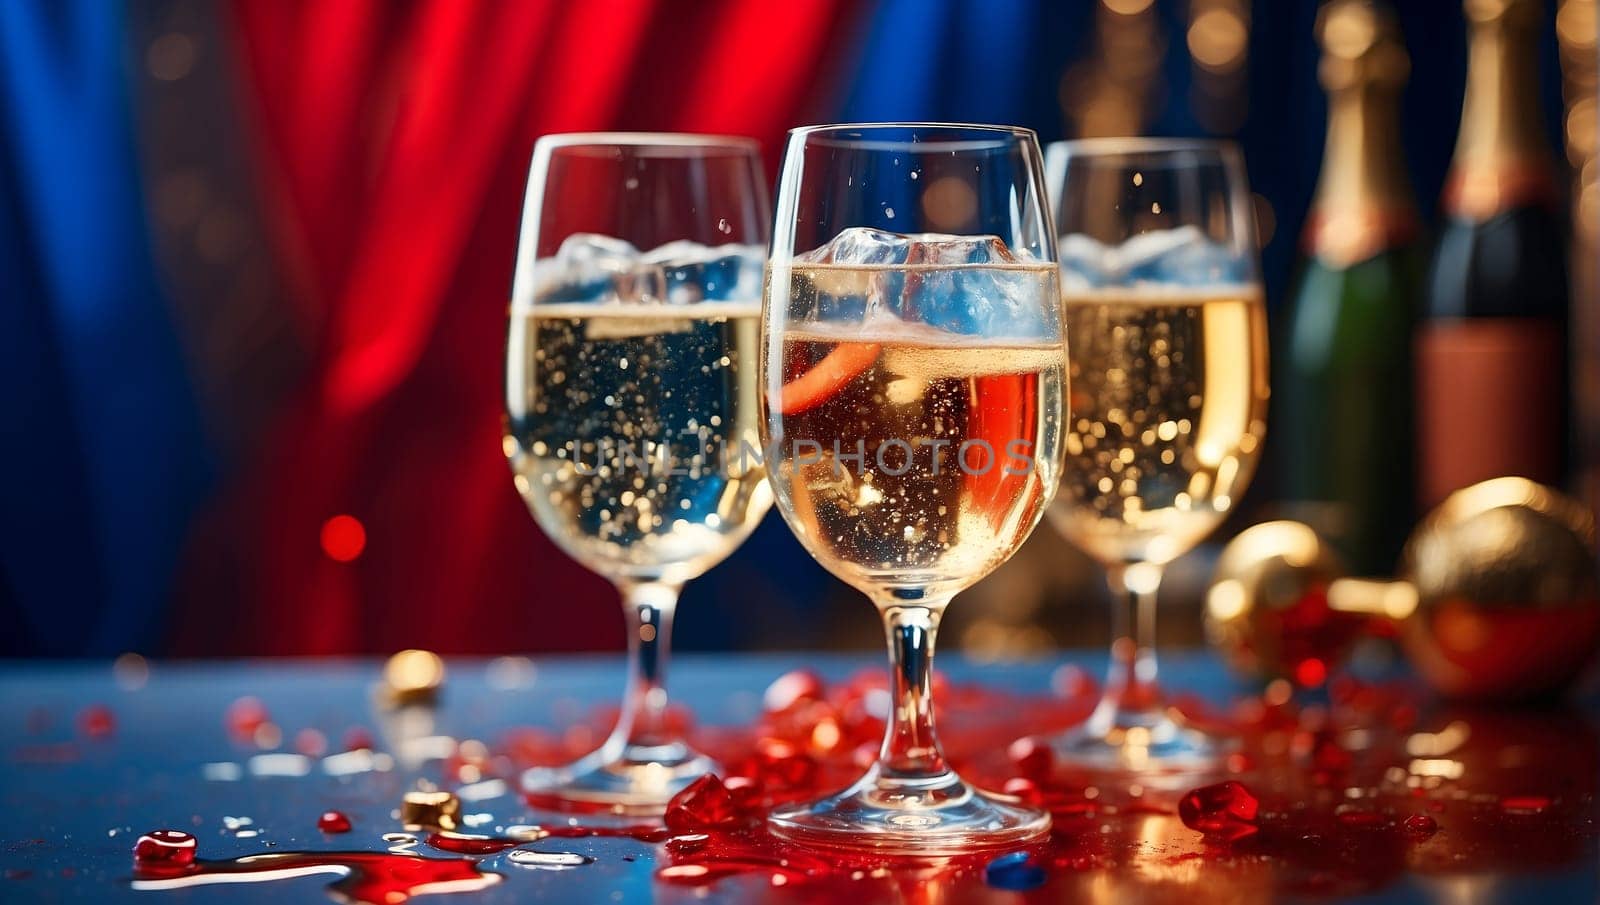 Champagne glasses on a red and blue dark background by Севостьянов